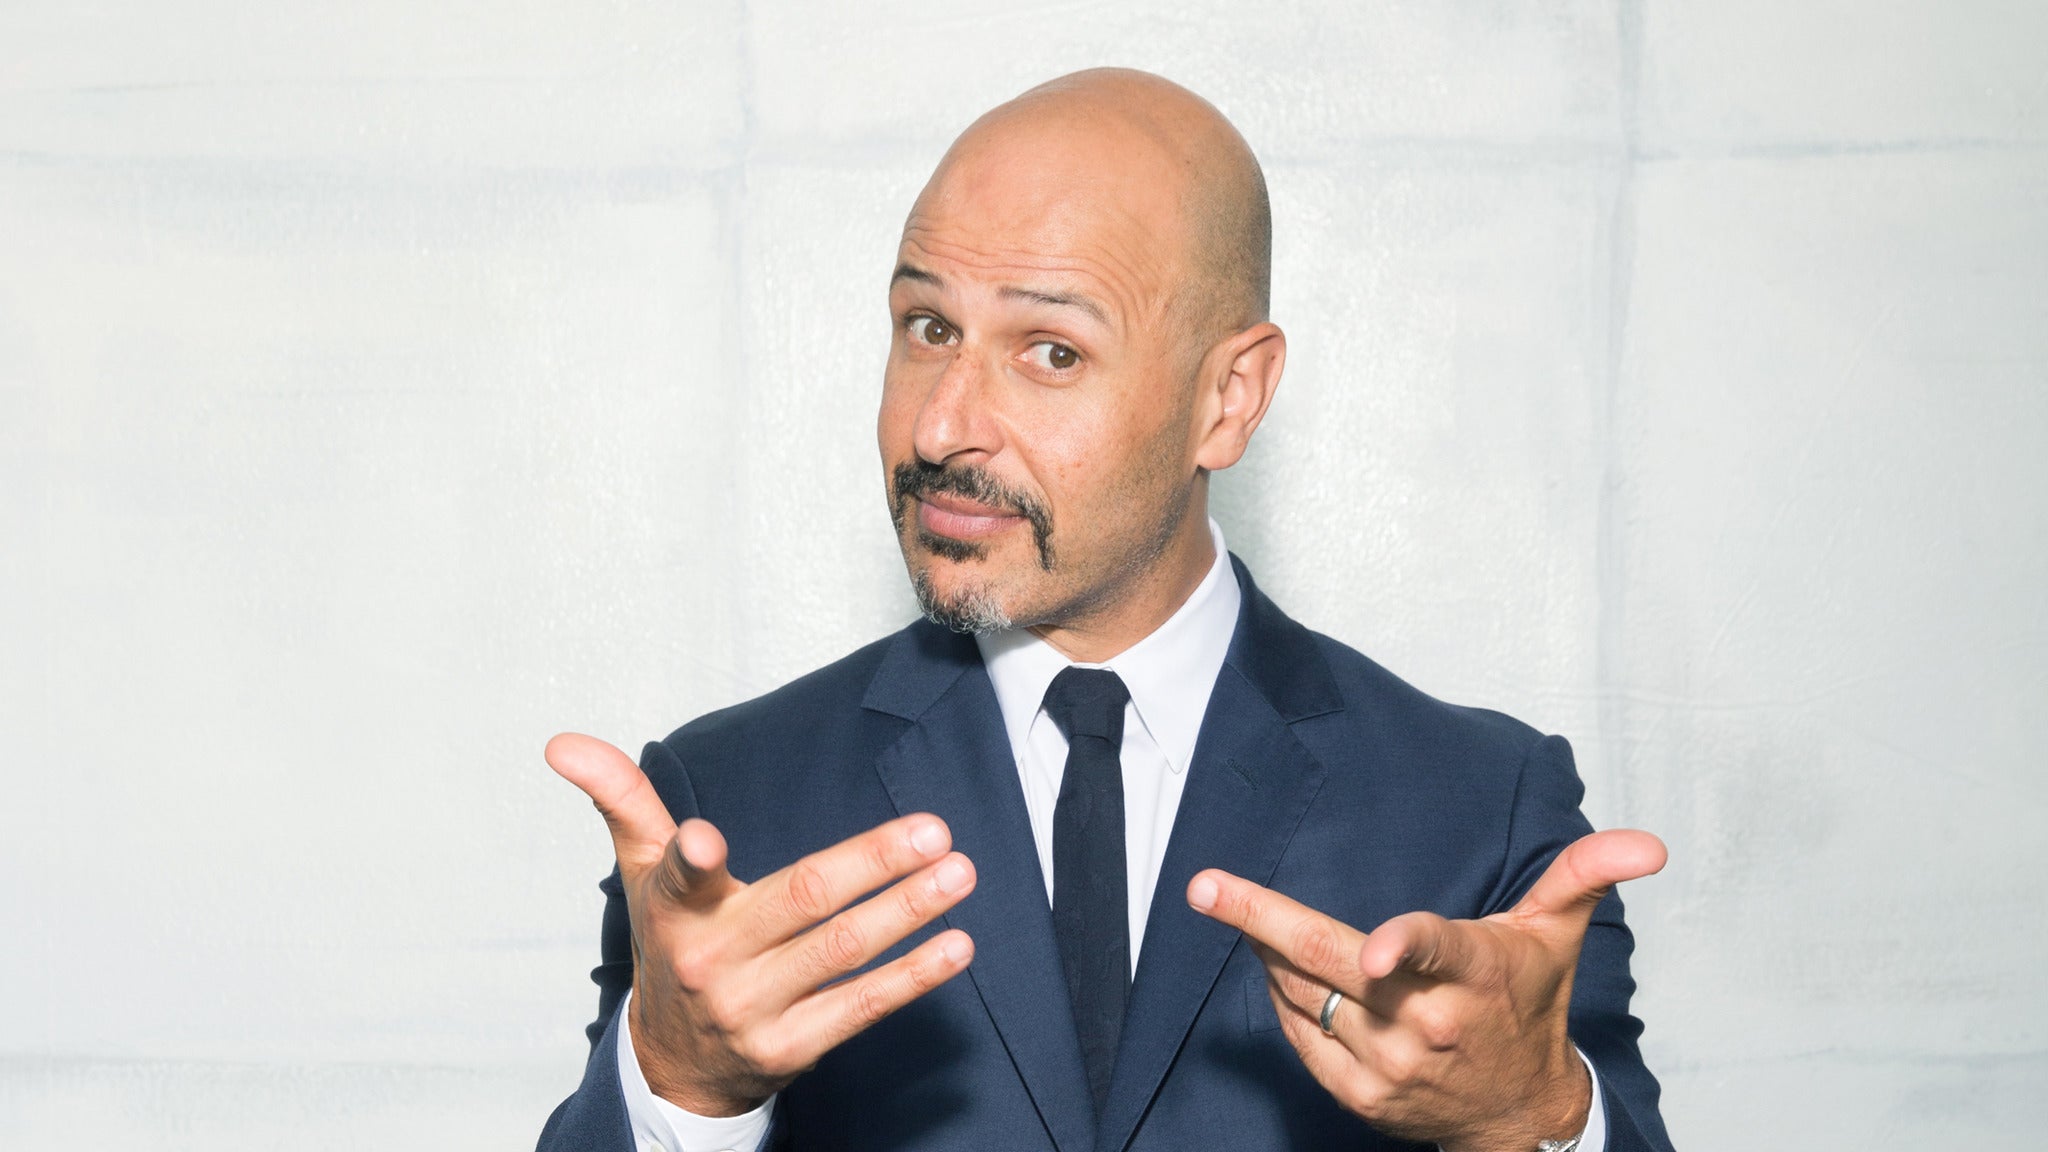 Tonight at the Improv ft. Maz Jobrani and more TBA!